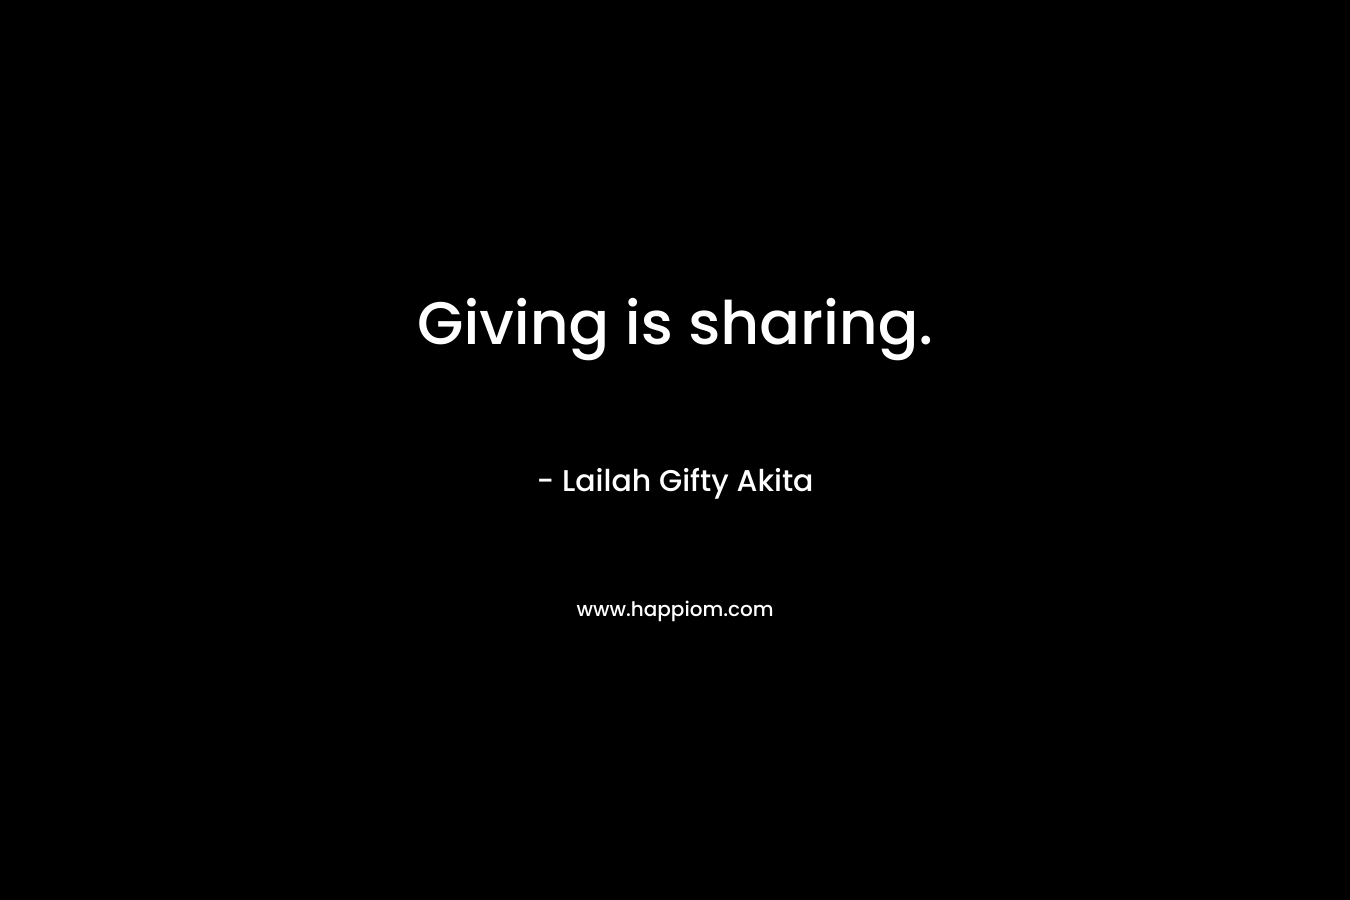 Giving is sharing.